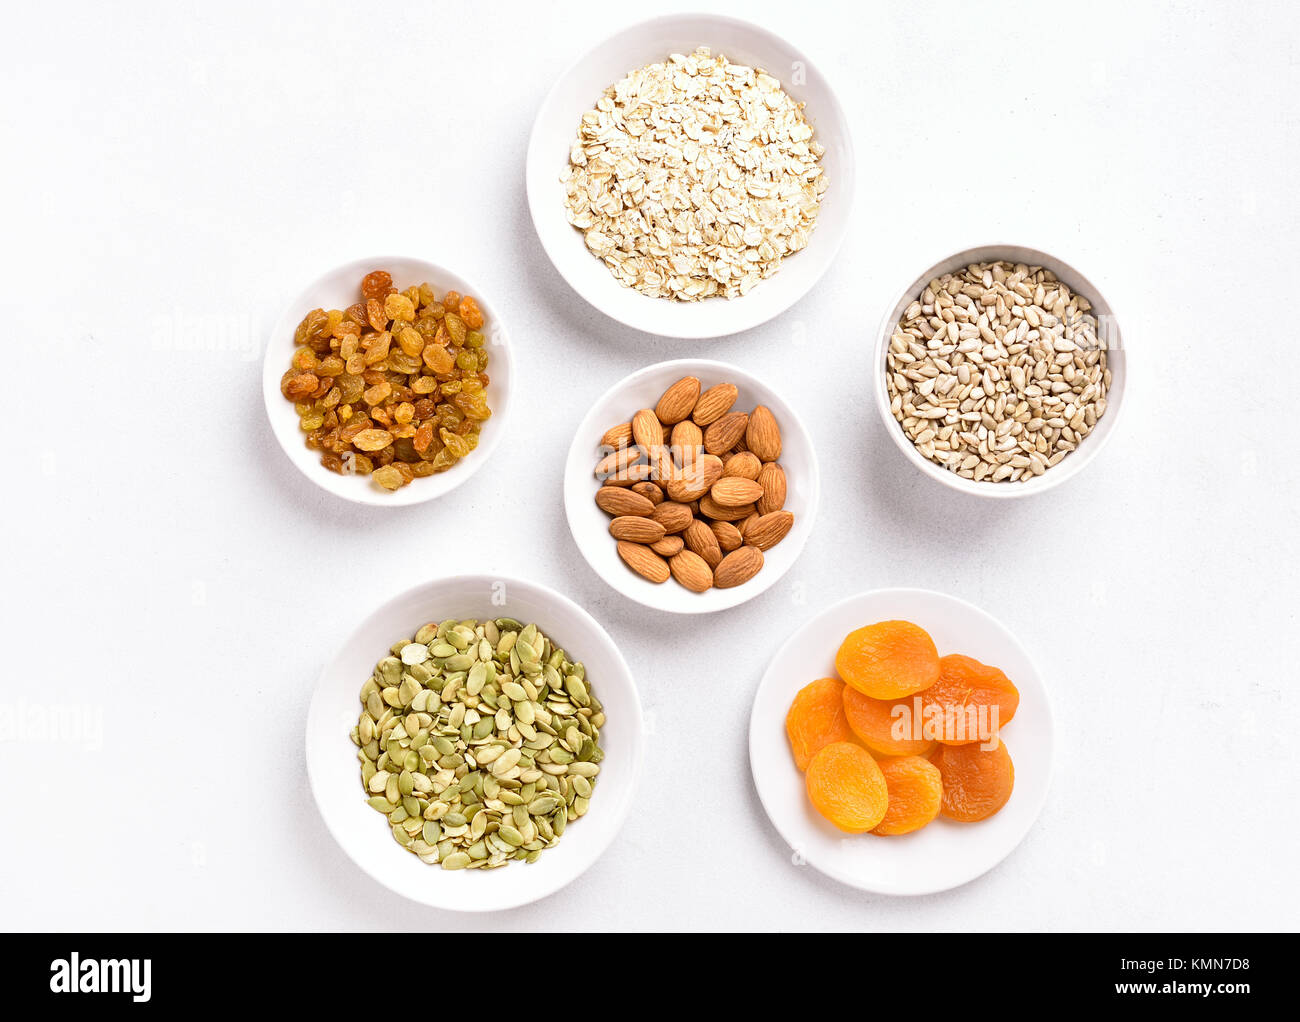 Bowl with ingredients for cooking granola on white background. Top view, flat lay Stock Photo